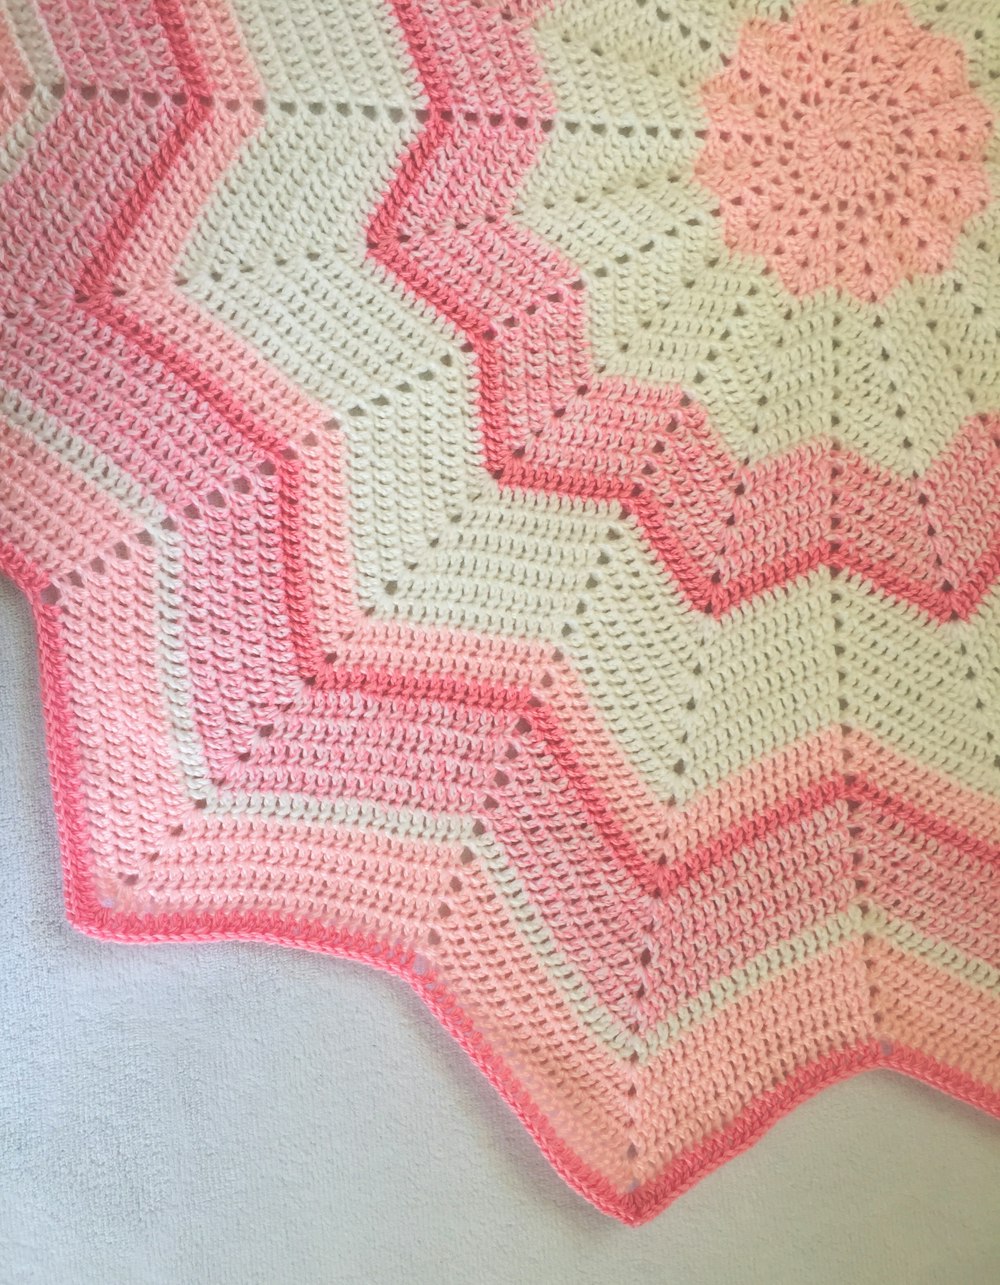 a pink and white crocheted blanket on a bed